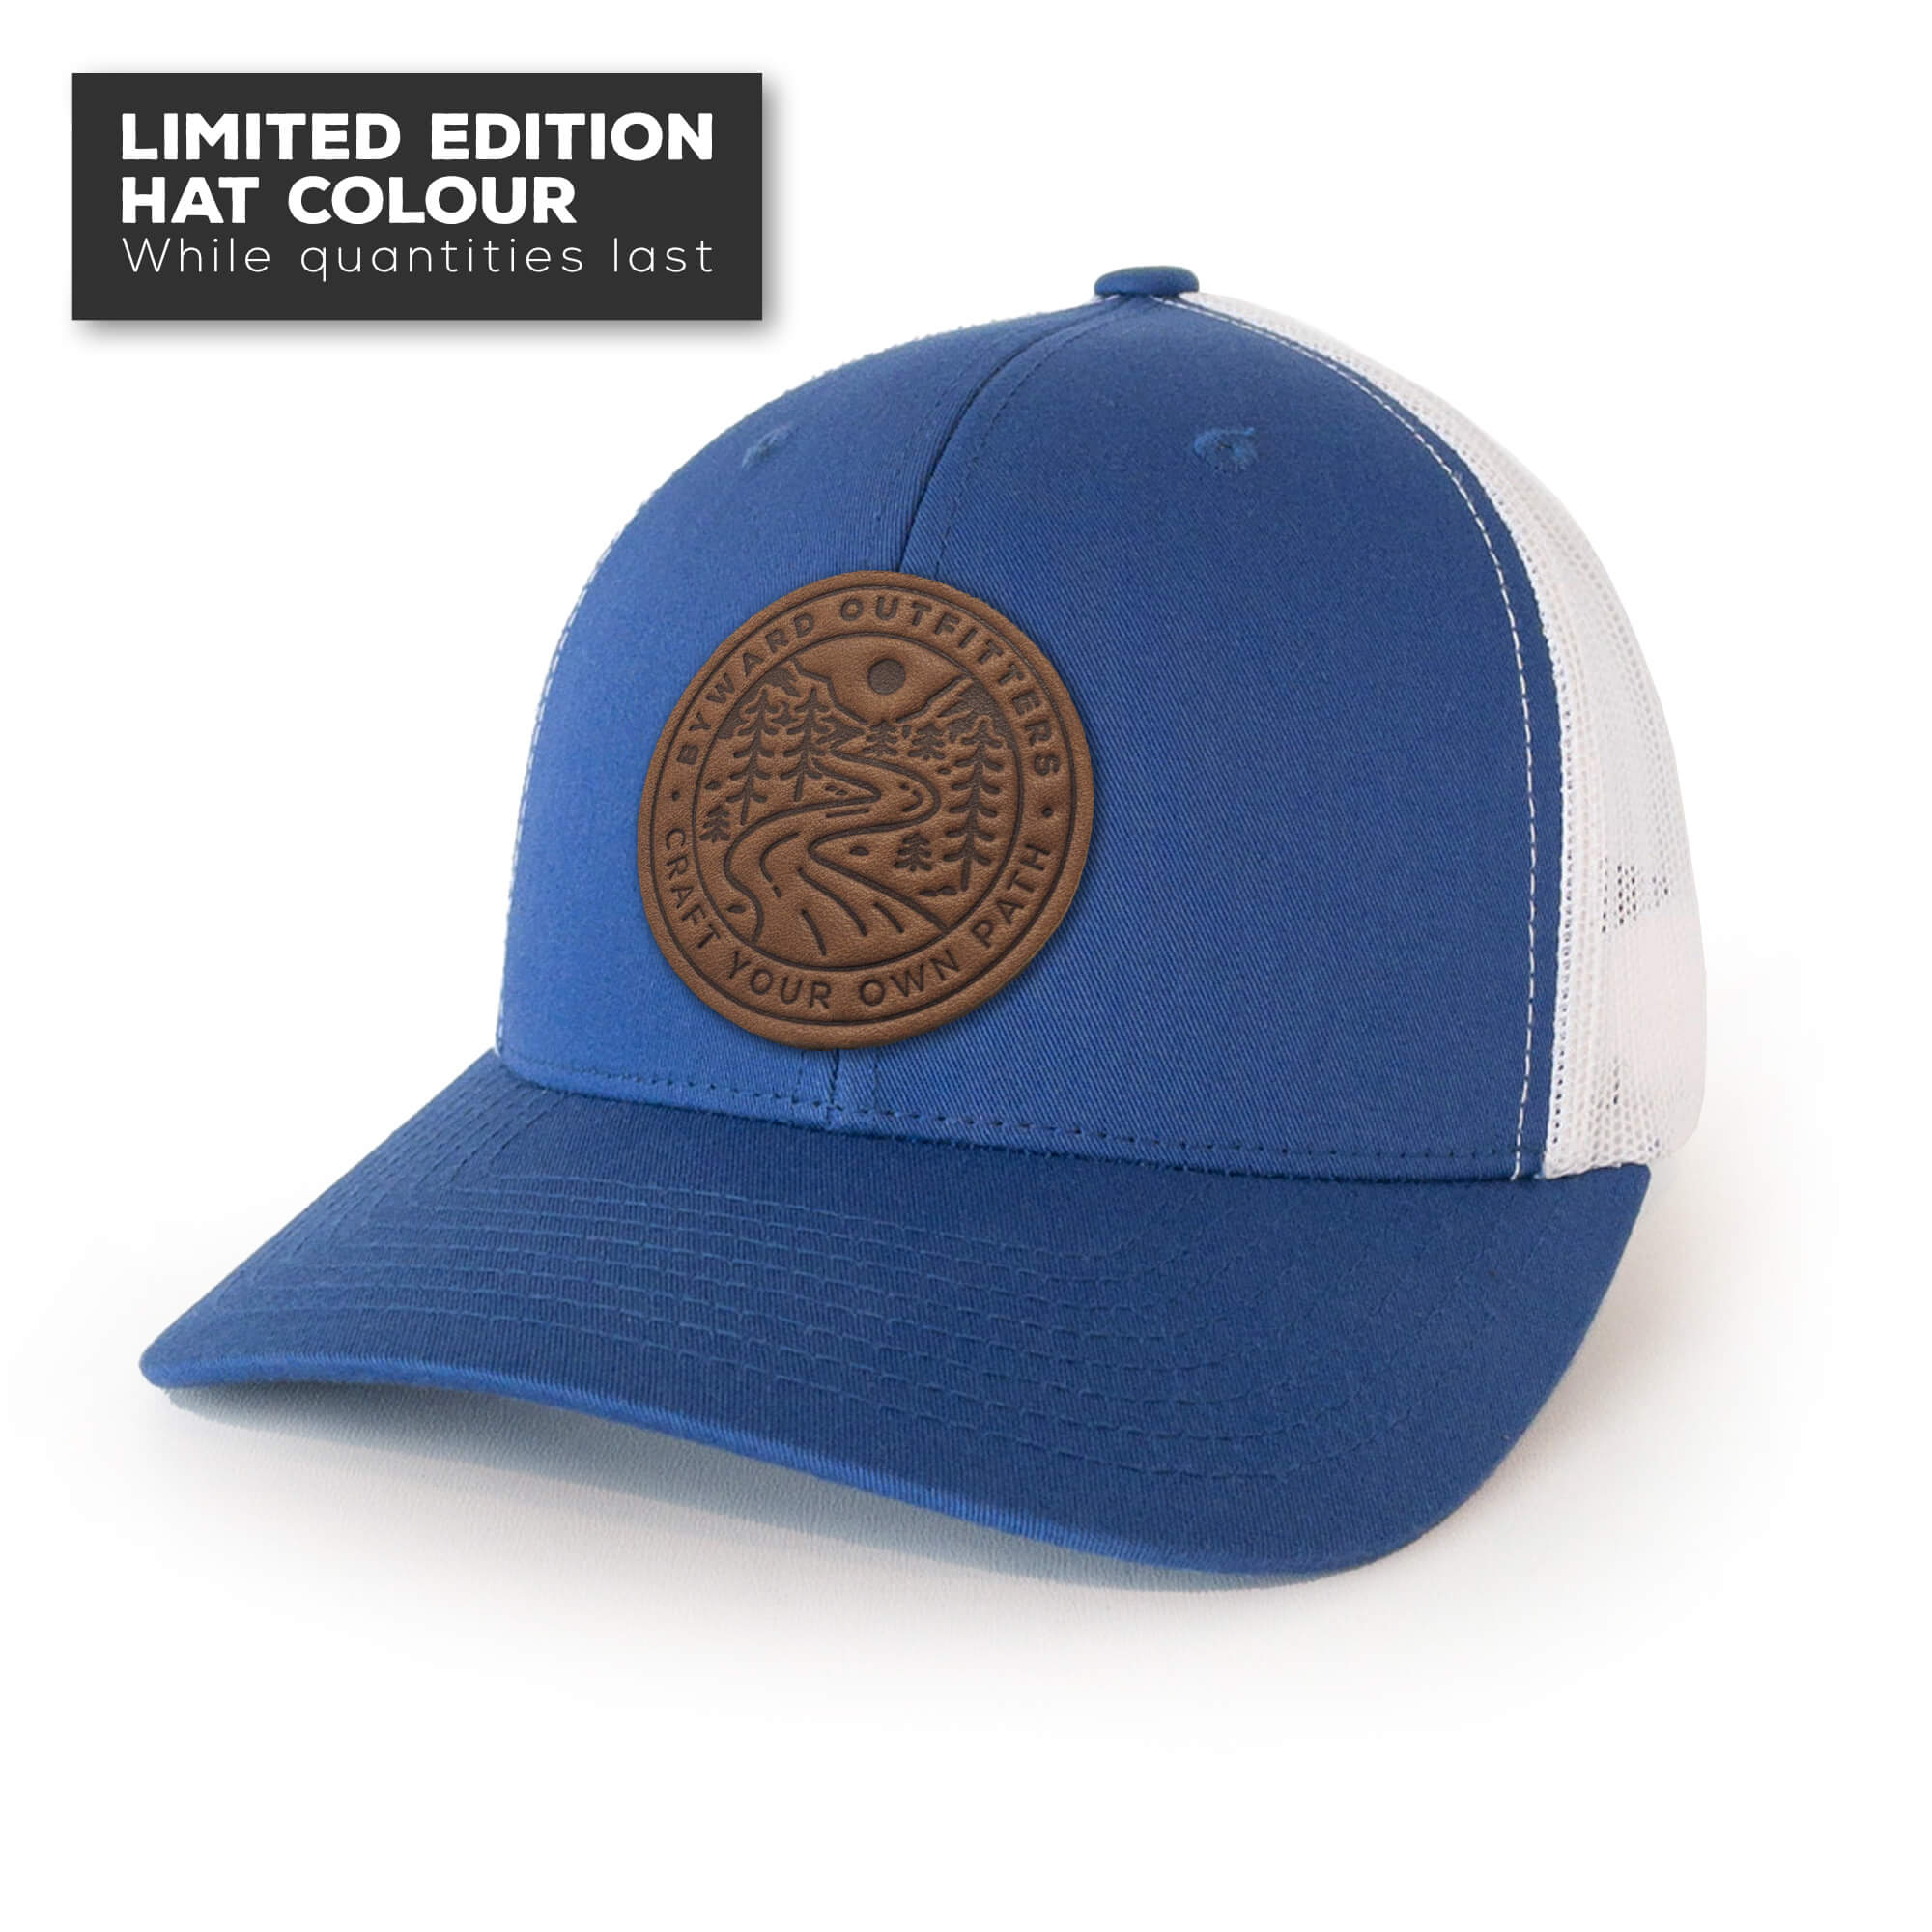 Royal Blue trucker hat with full-grain leather patch of Winding Wilderness